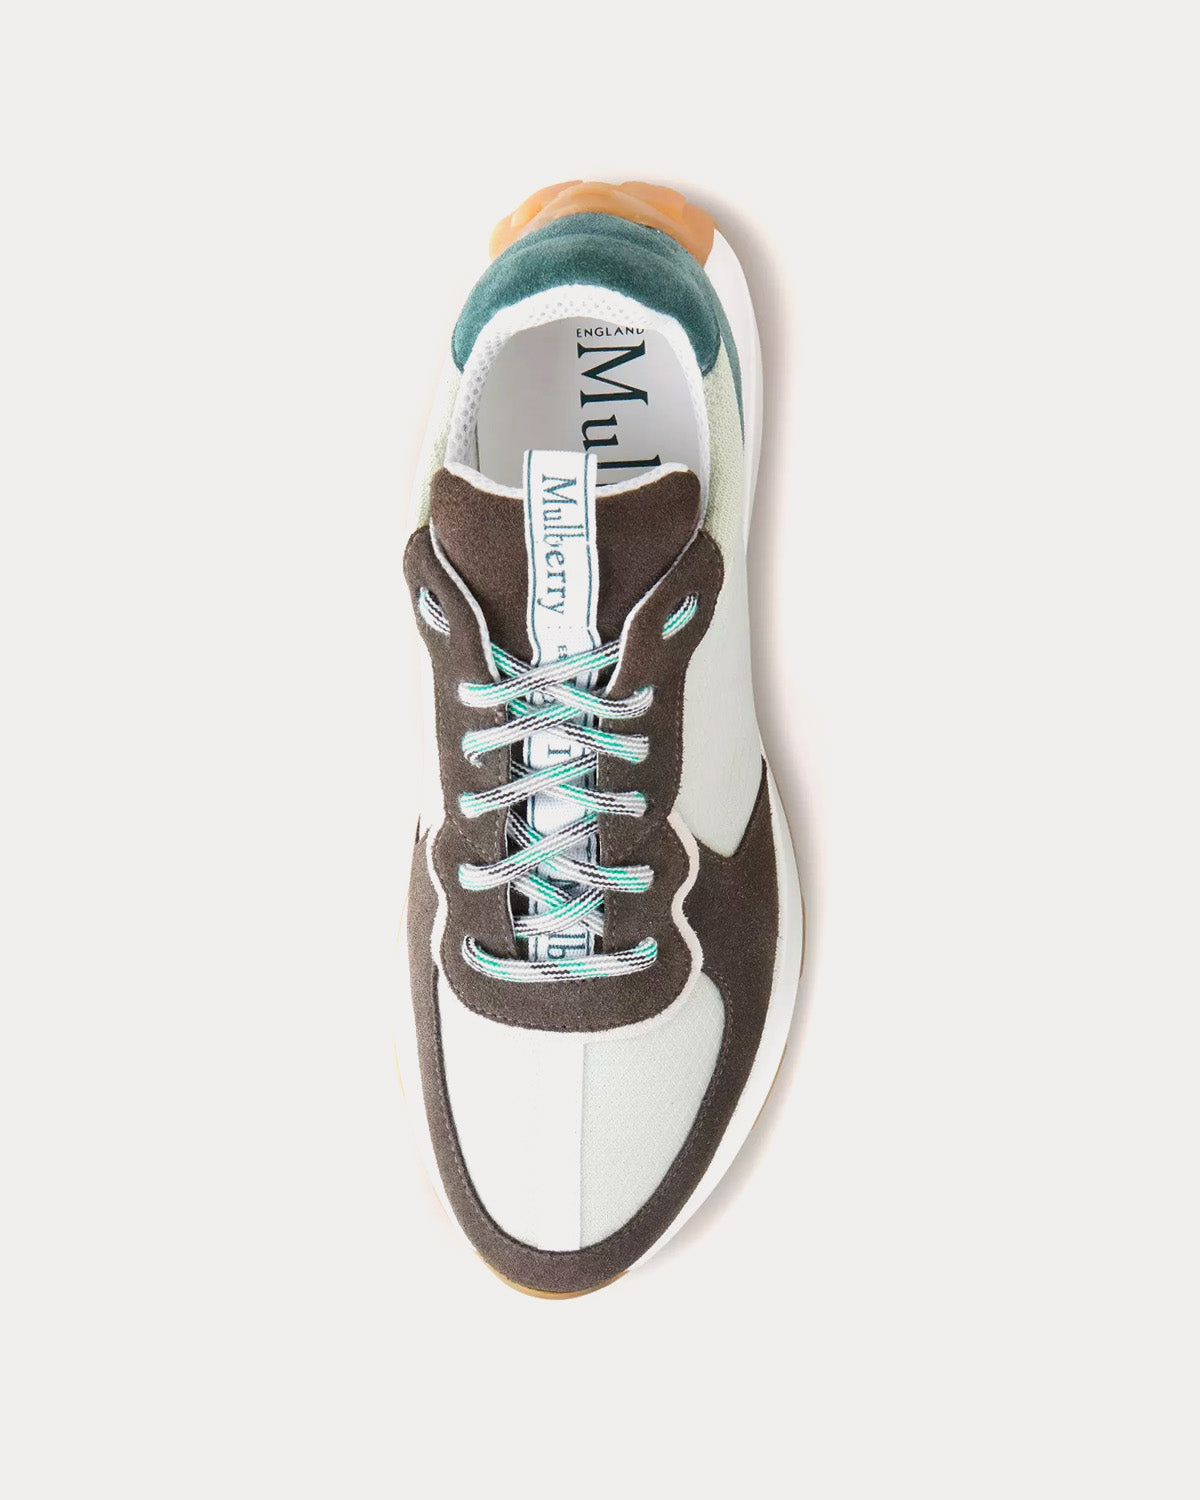 Mulberry - Runner Mixed Material Acrylic Green / Midnight / Maple Low Top Sneakers